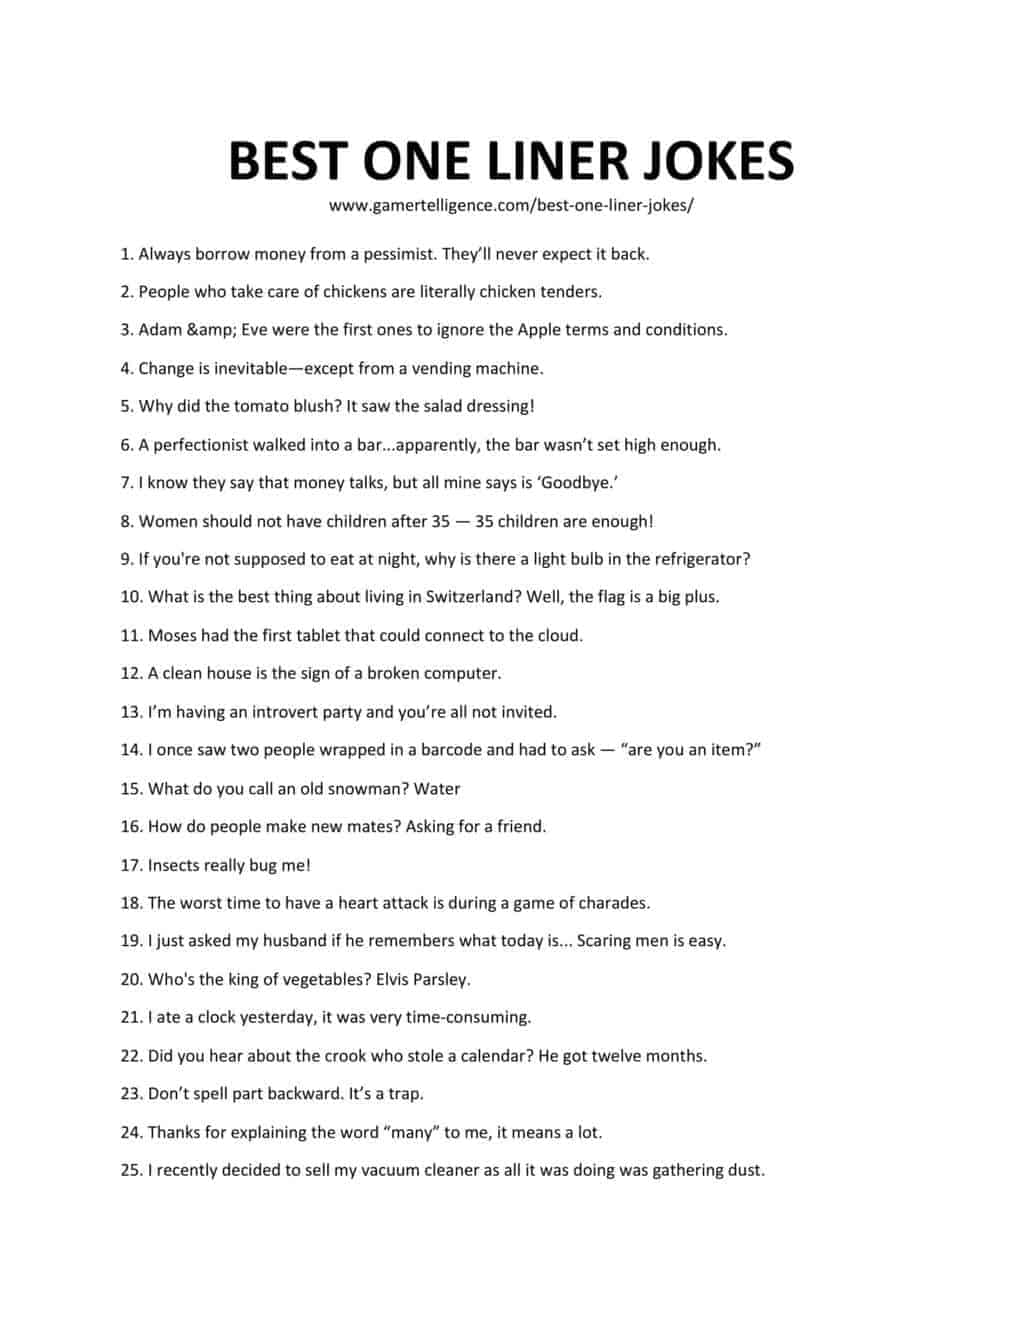 28 Best One Liner Jokes - Charming And Wondrous Laughs And Fun In Here